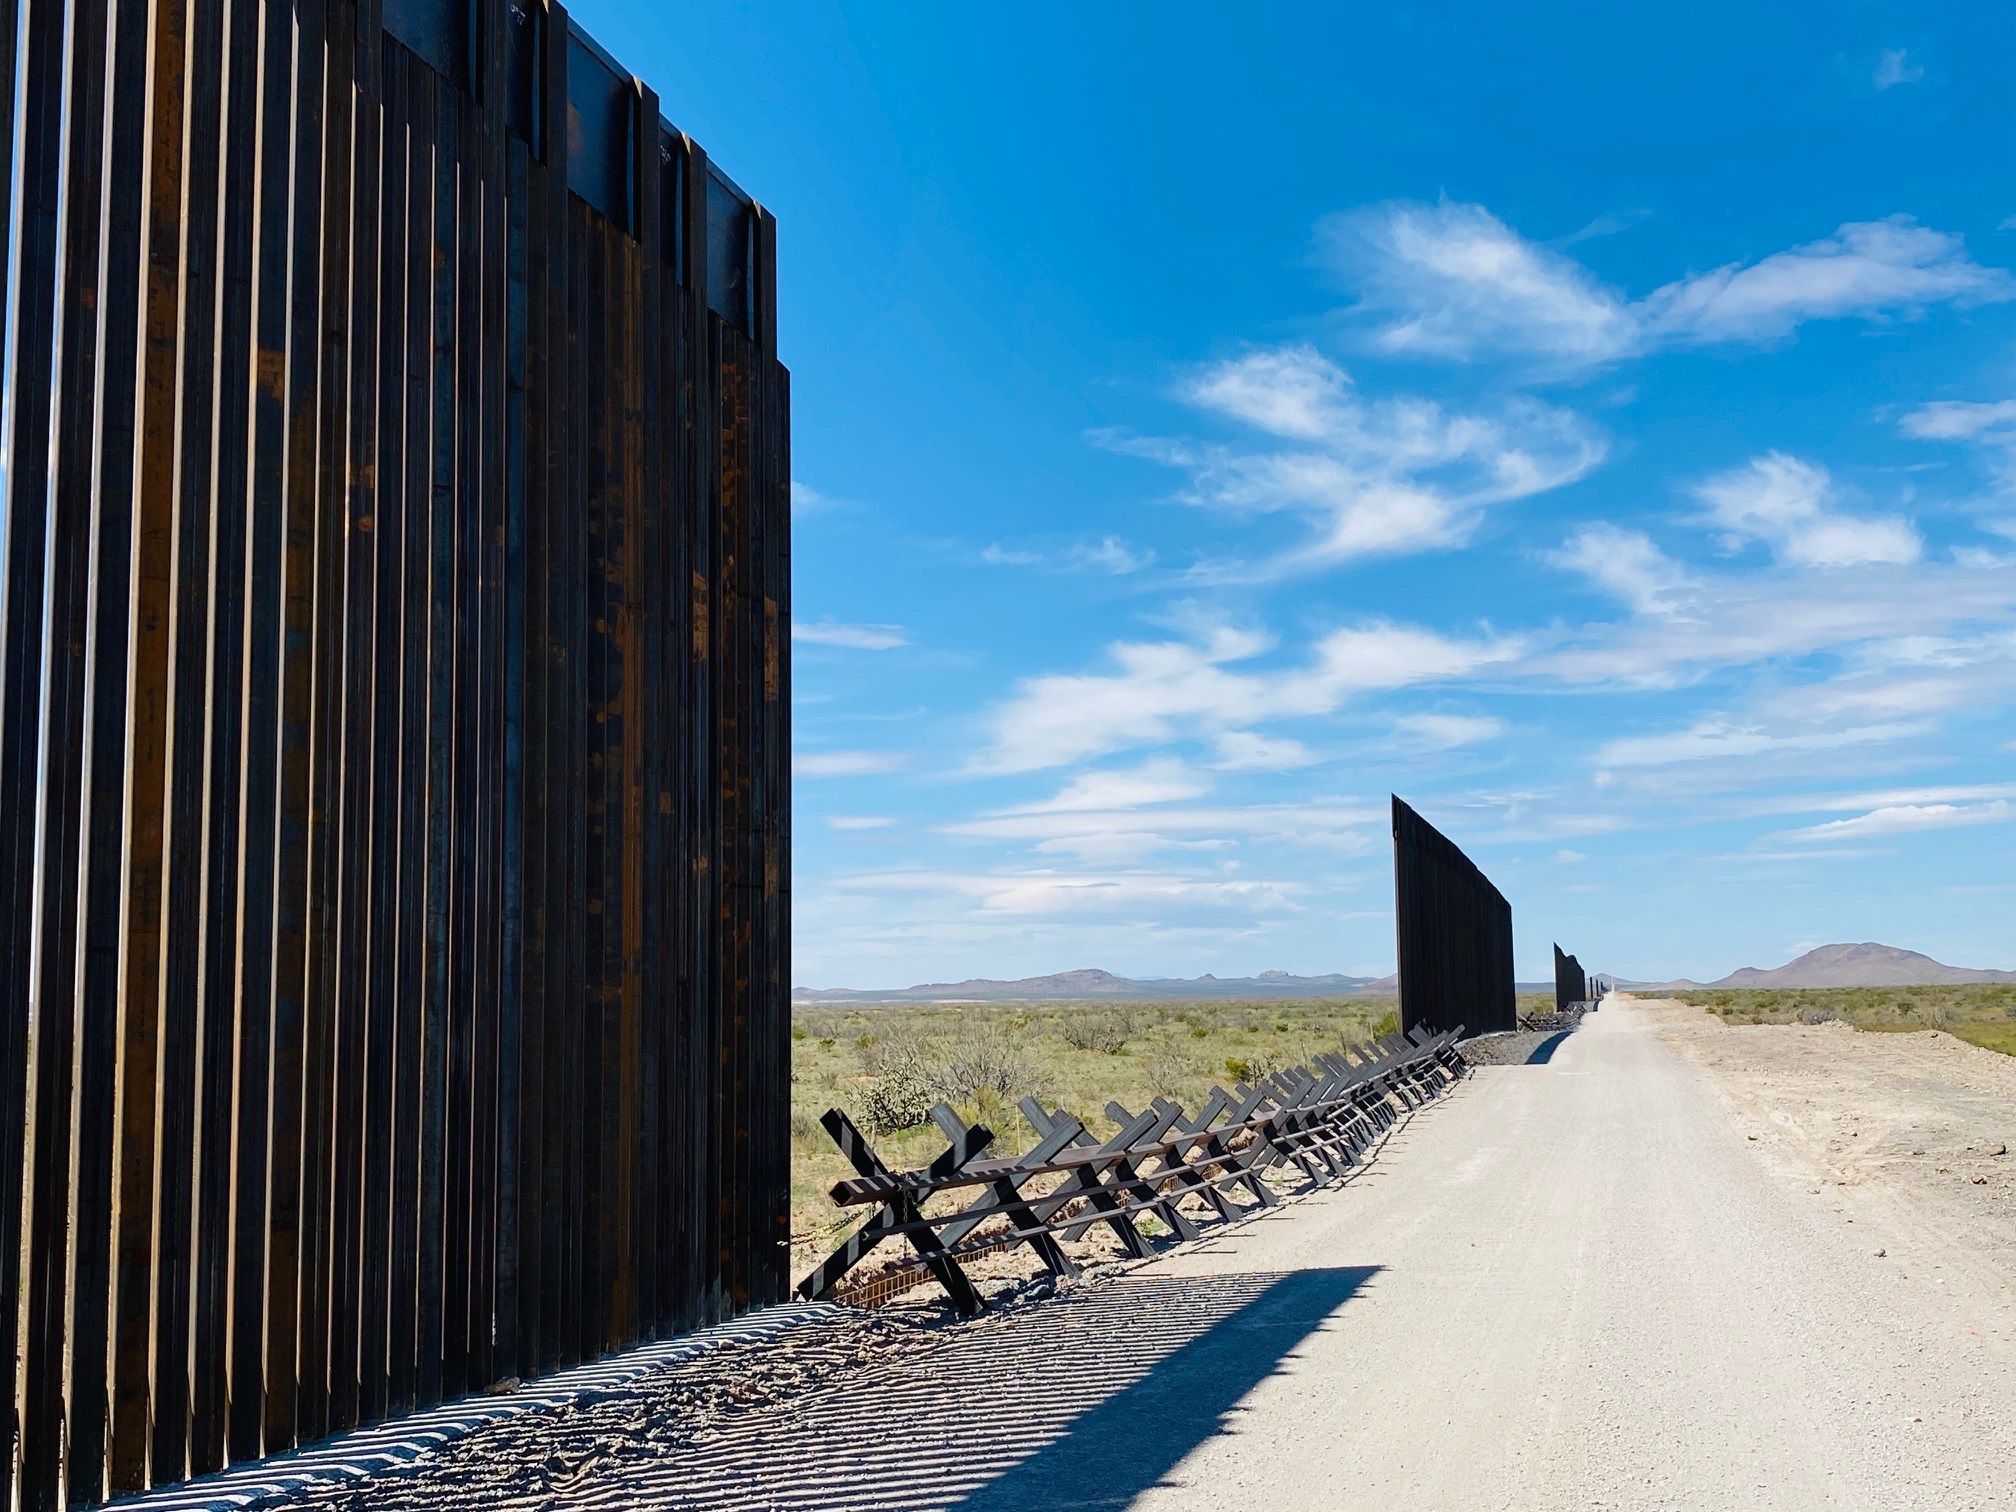 Don't Expand the Border Wall. Instead, Fix Existing Policies That